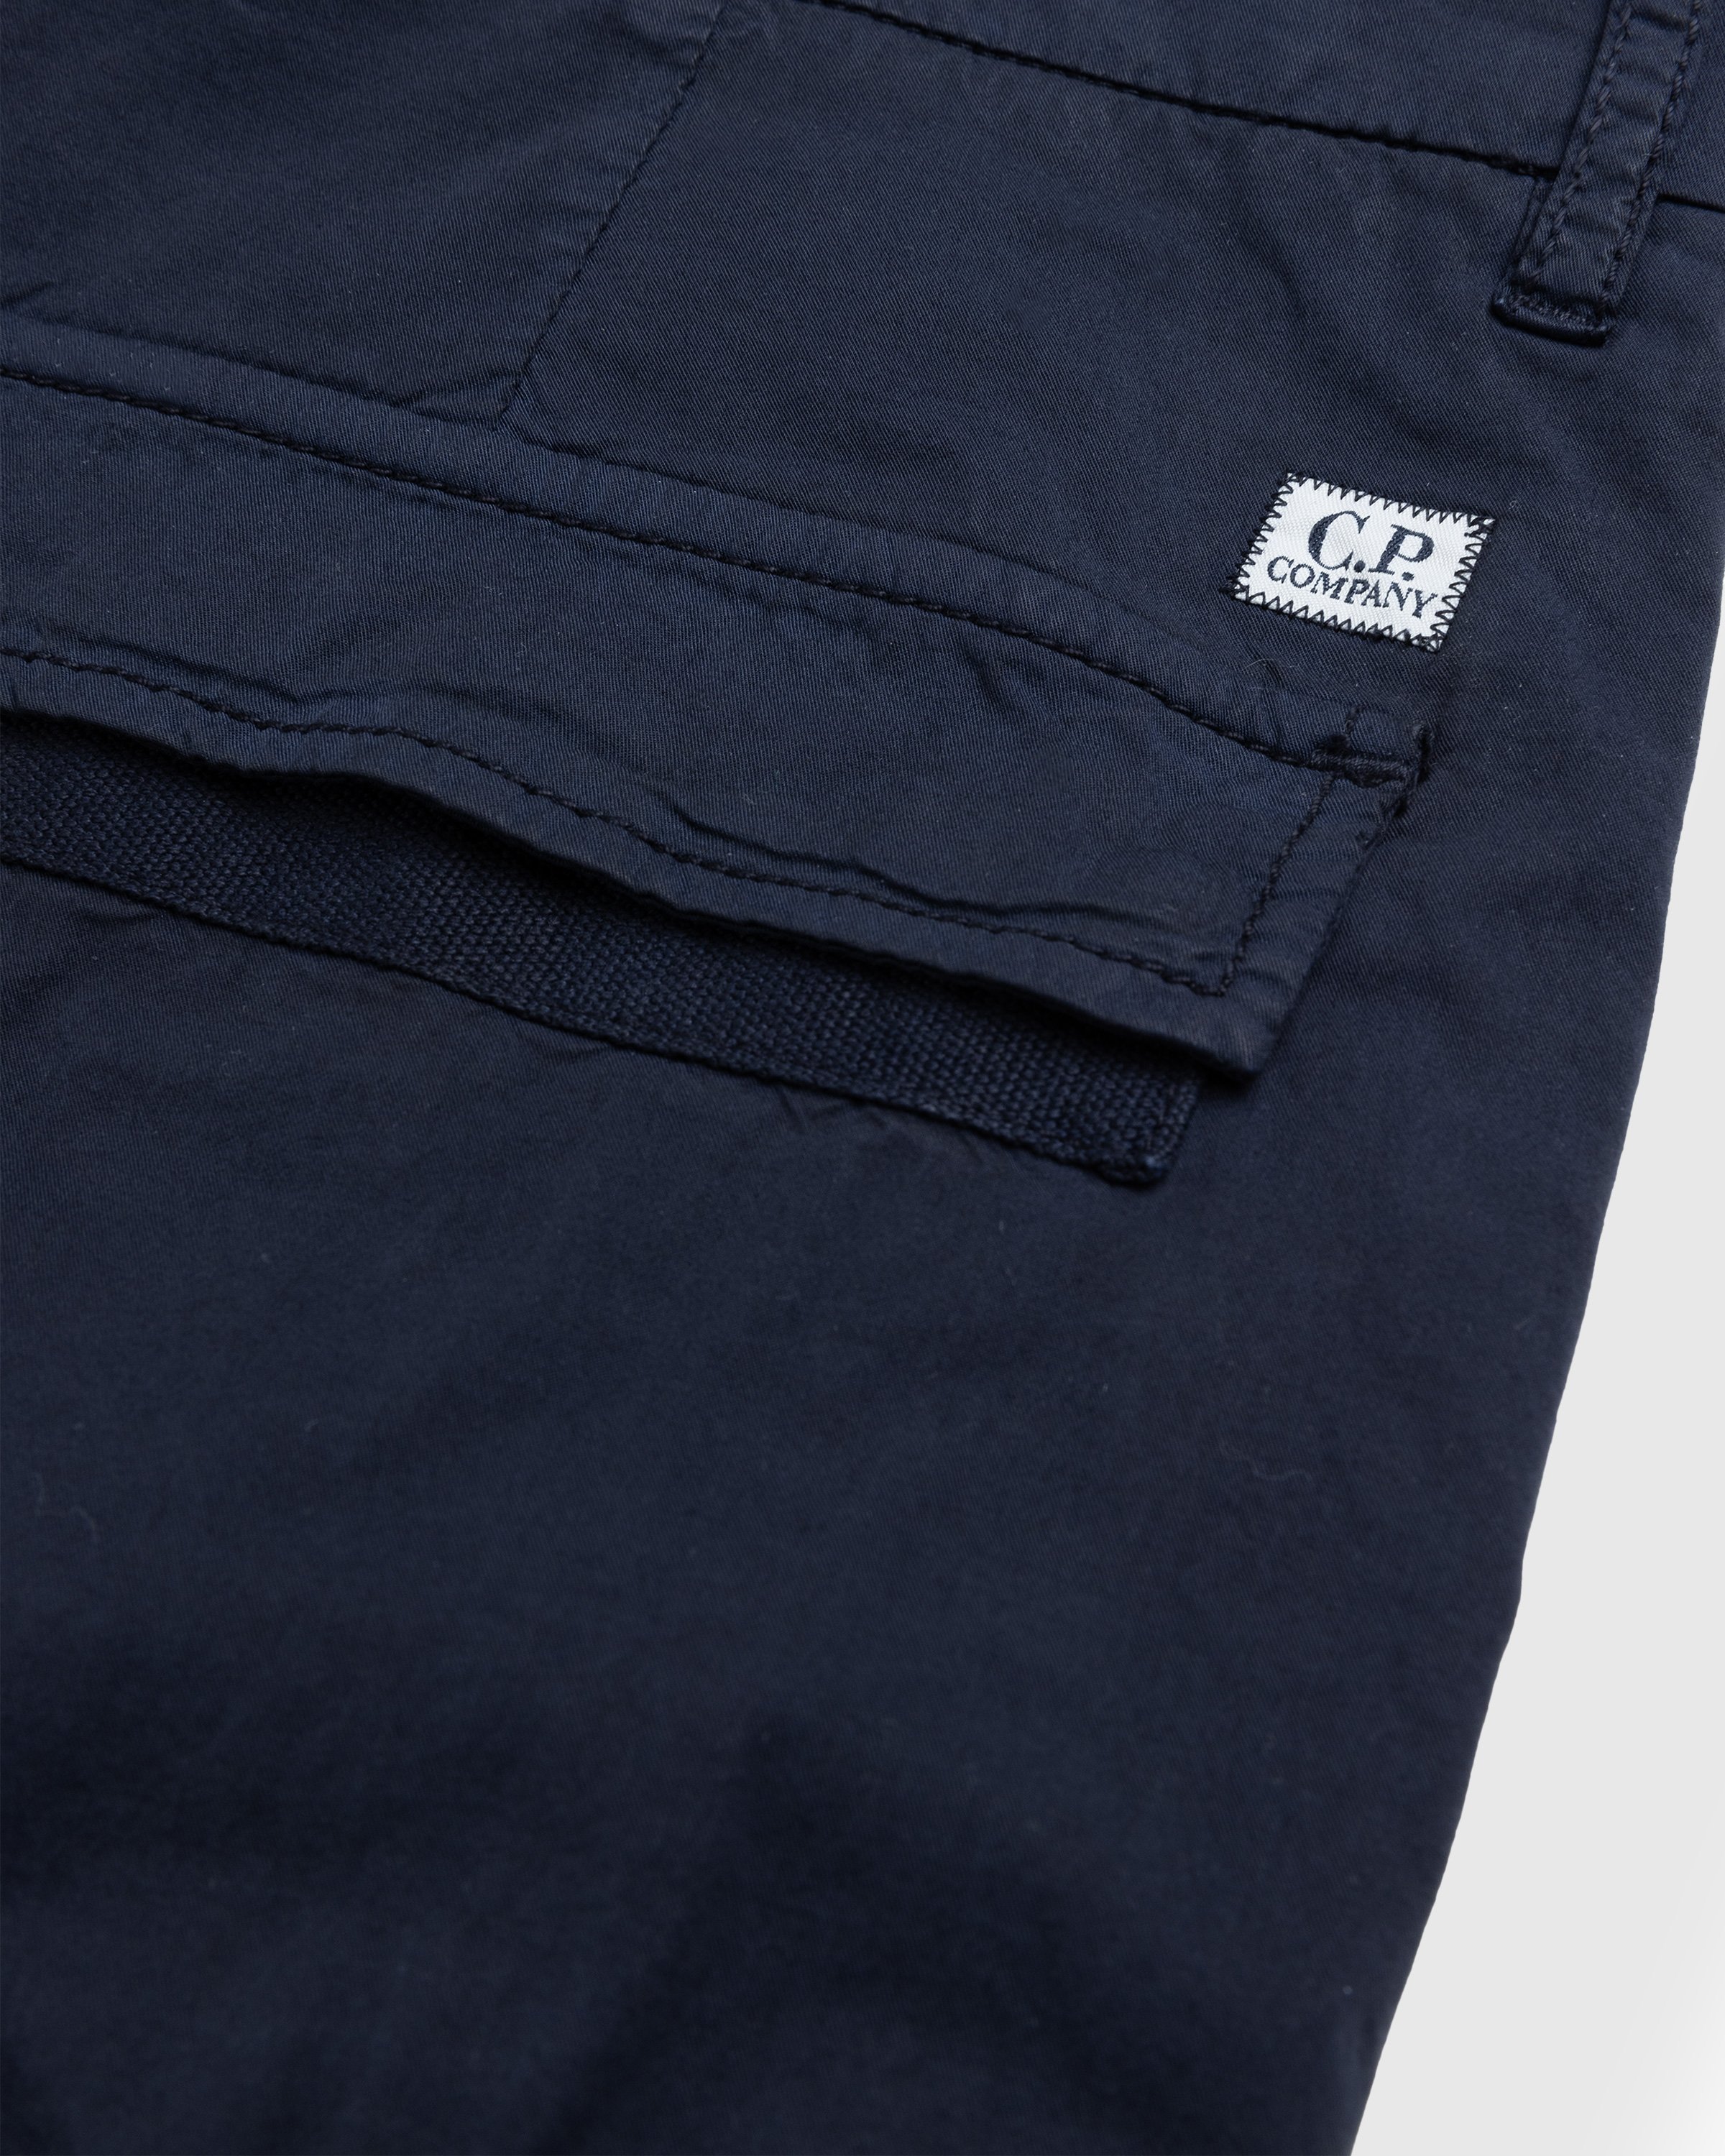 C.P. Company - Twill Stretch Cargo Pants Total Eclipse Blue - Clothing - Blue - Image 5